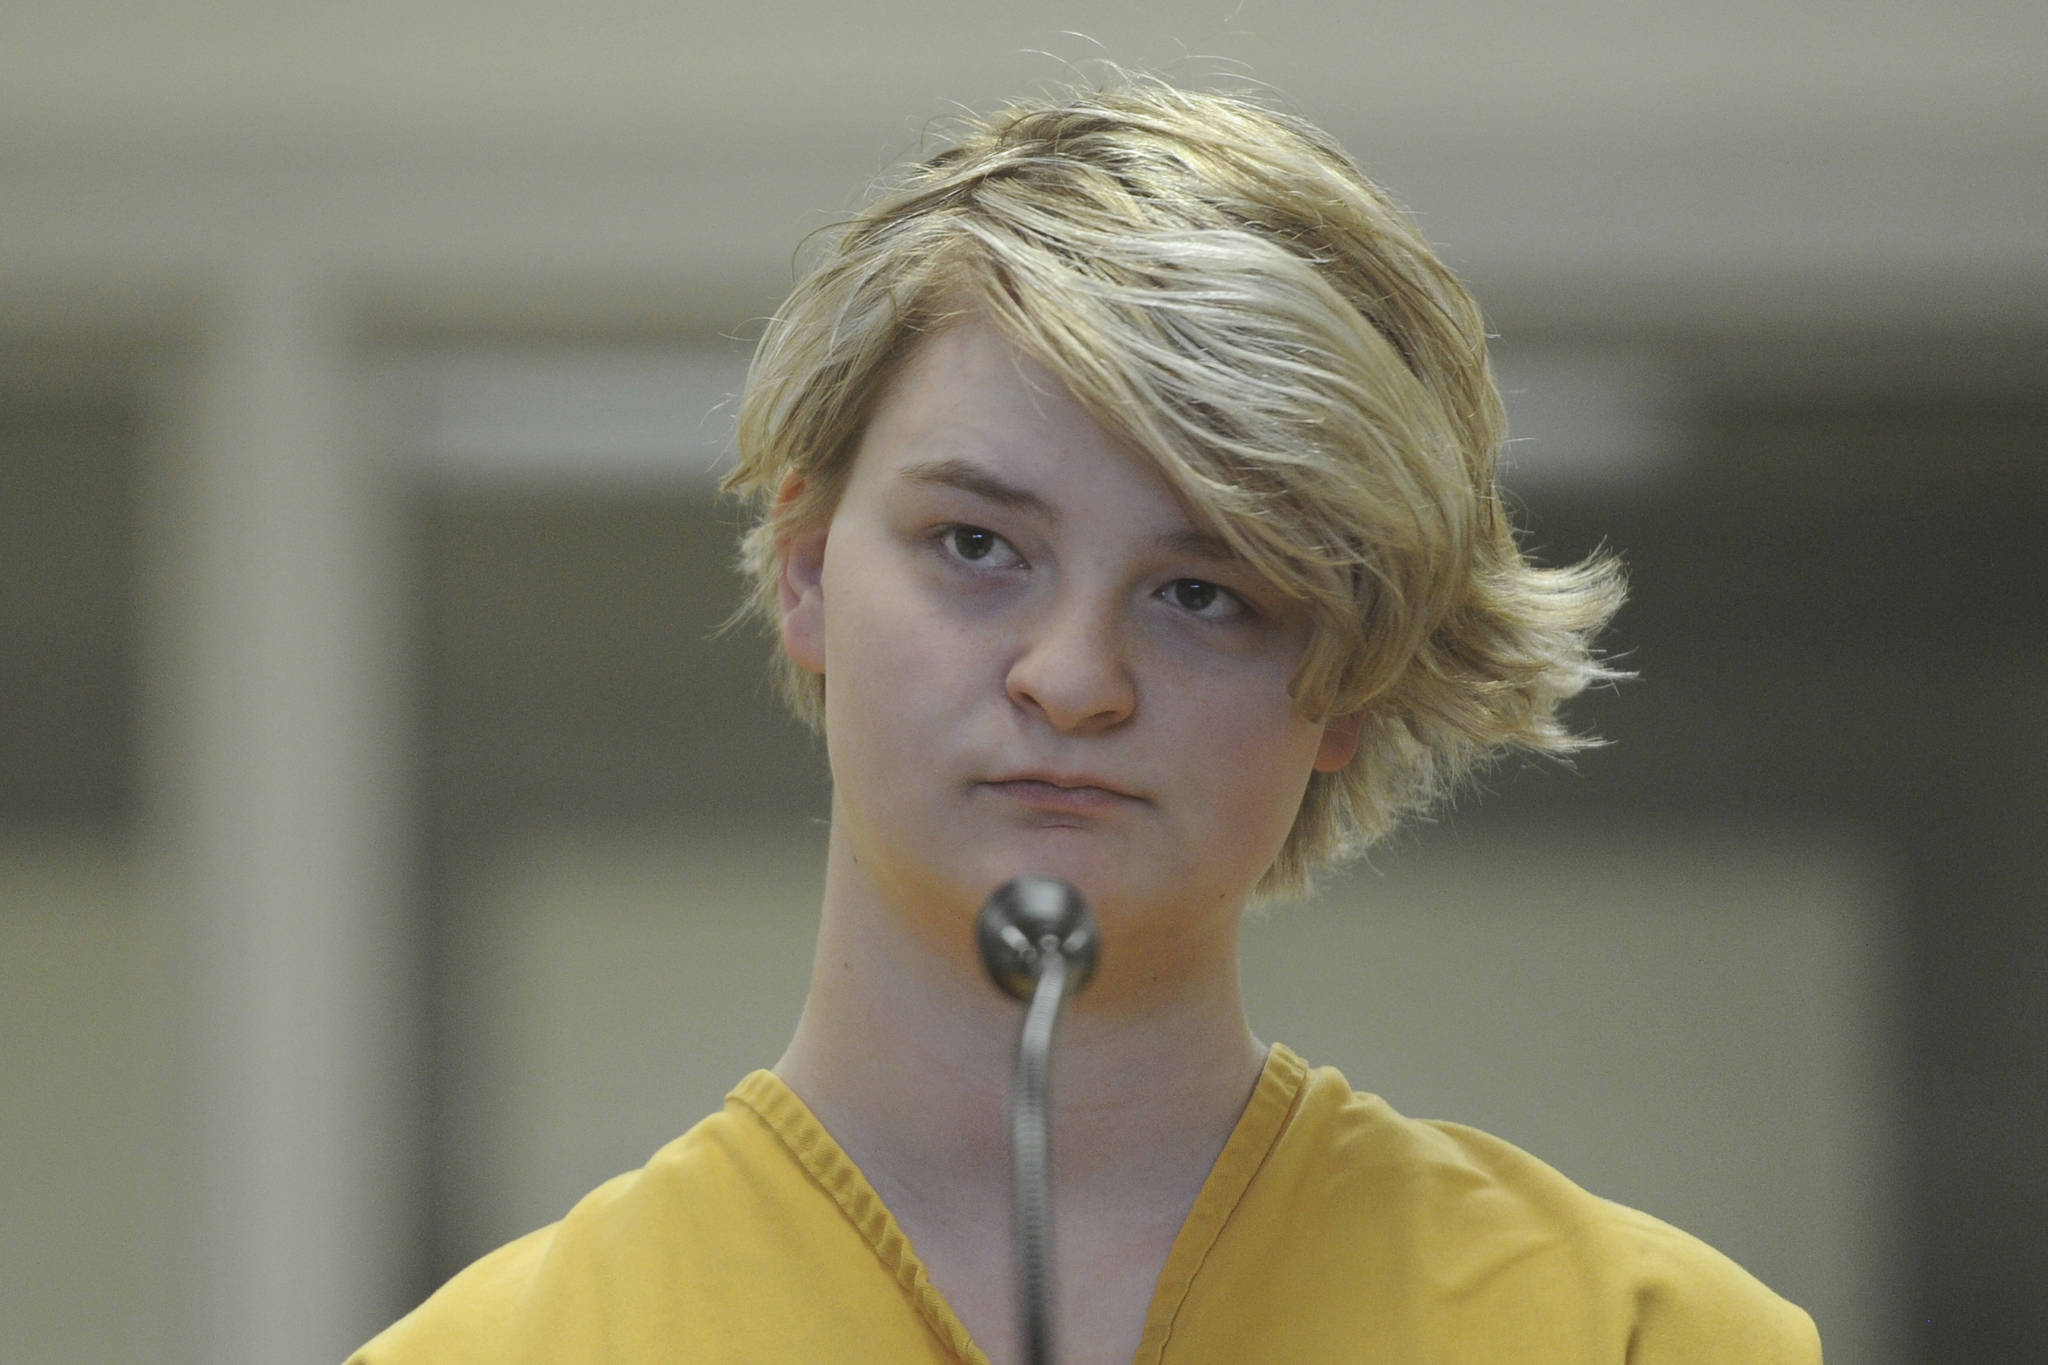 In this Sunday, June 9, 2019 photo, Denali Brehmer, 18, stands at her arraignment in the Anchorage Correctional Center in Anchorage. Brehmer has been charged with first-degree murder in the death of Cynthia Hoffman. (Bill Roth/Anchorage Daily News via AP)